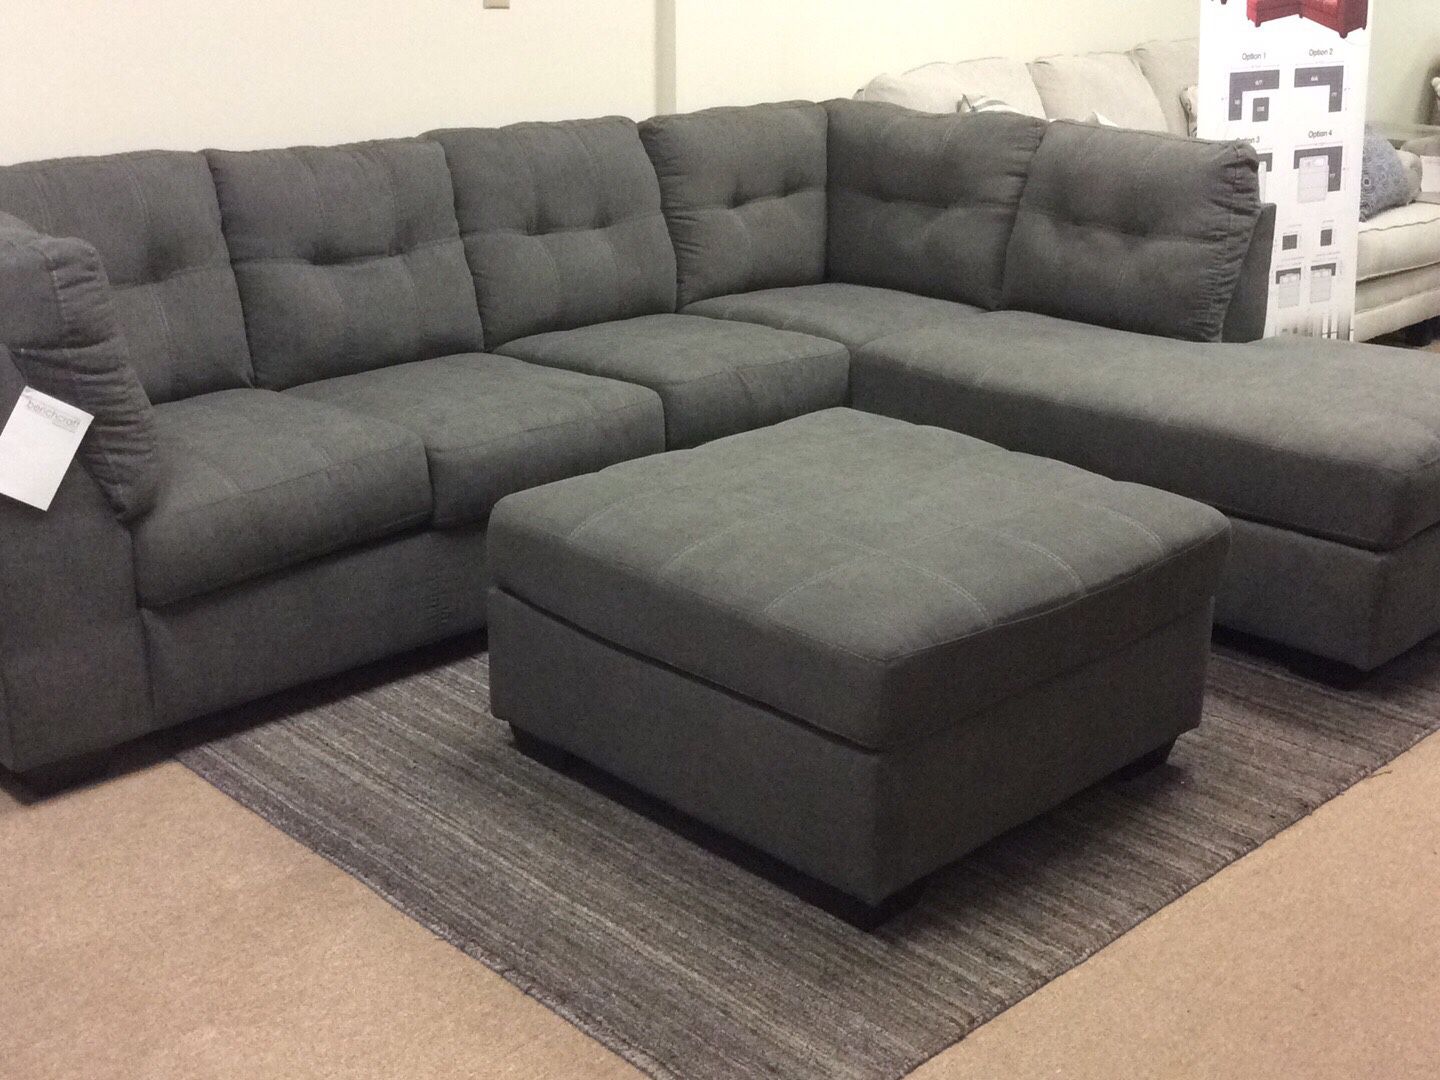 Brand new ashley sectional and ottoman combo on sale today!!!